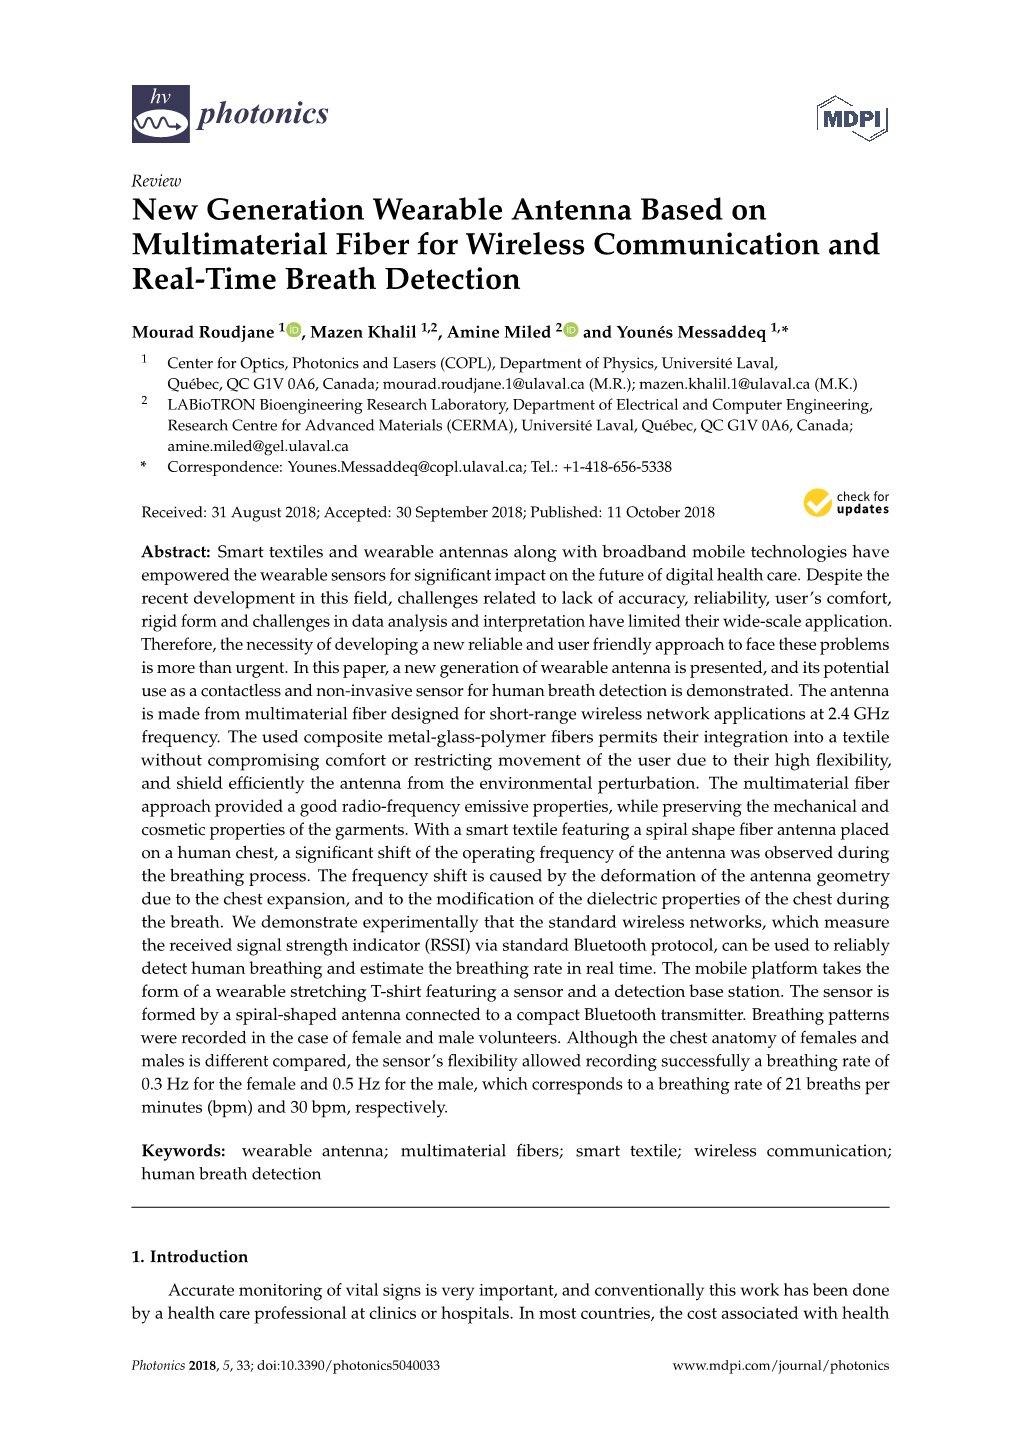 New Generation Wearable Antenna Based on Multimaterial Fiber for Wireless Communication and Real-Time Breath Detection